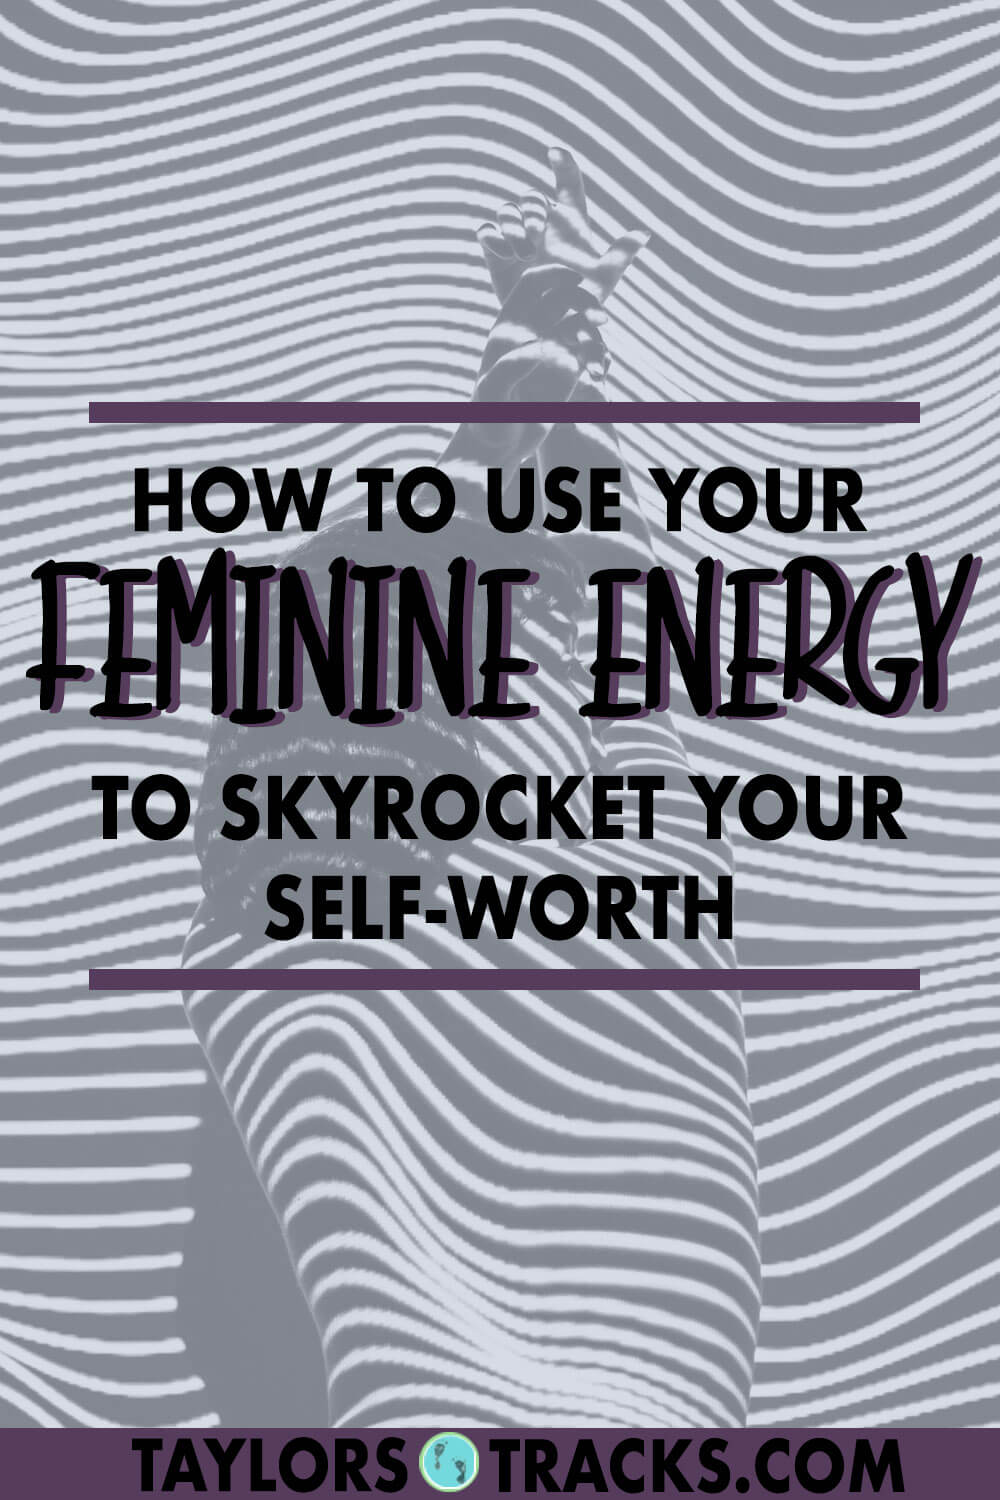 Your feminine energy is not something that you should be scared of. It won’t make you wild or out of control, instead, it will help you feel more like you. You’ll need less masculine energy and control and just be happy by being in the moment. Click to learn how to tap into your feminine energy so that you can be more confident, feel self-worth and self-love.